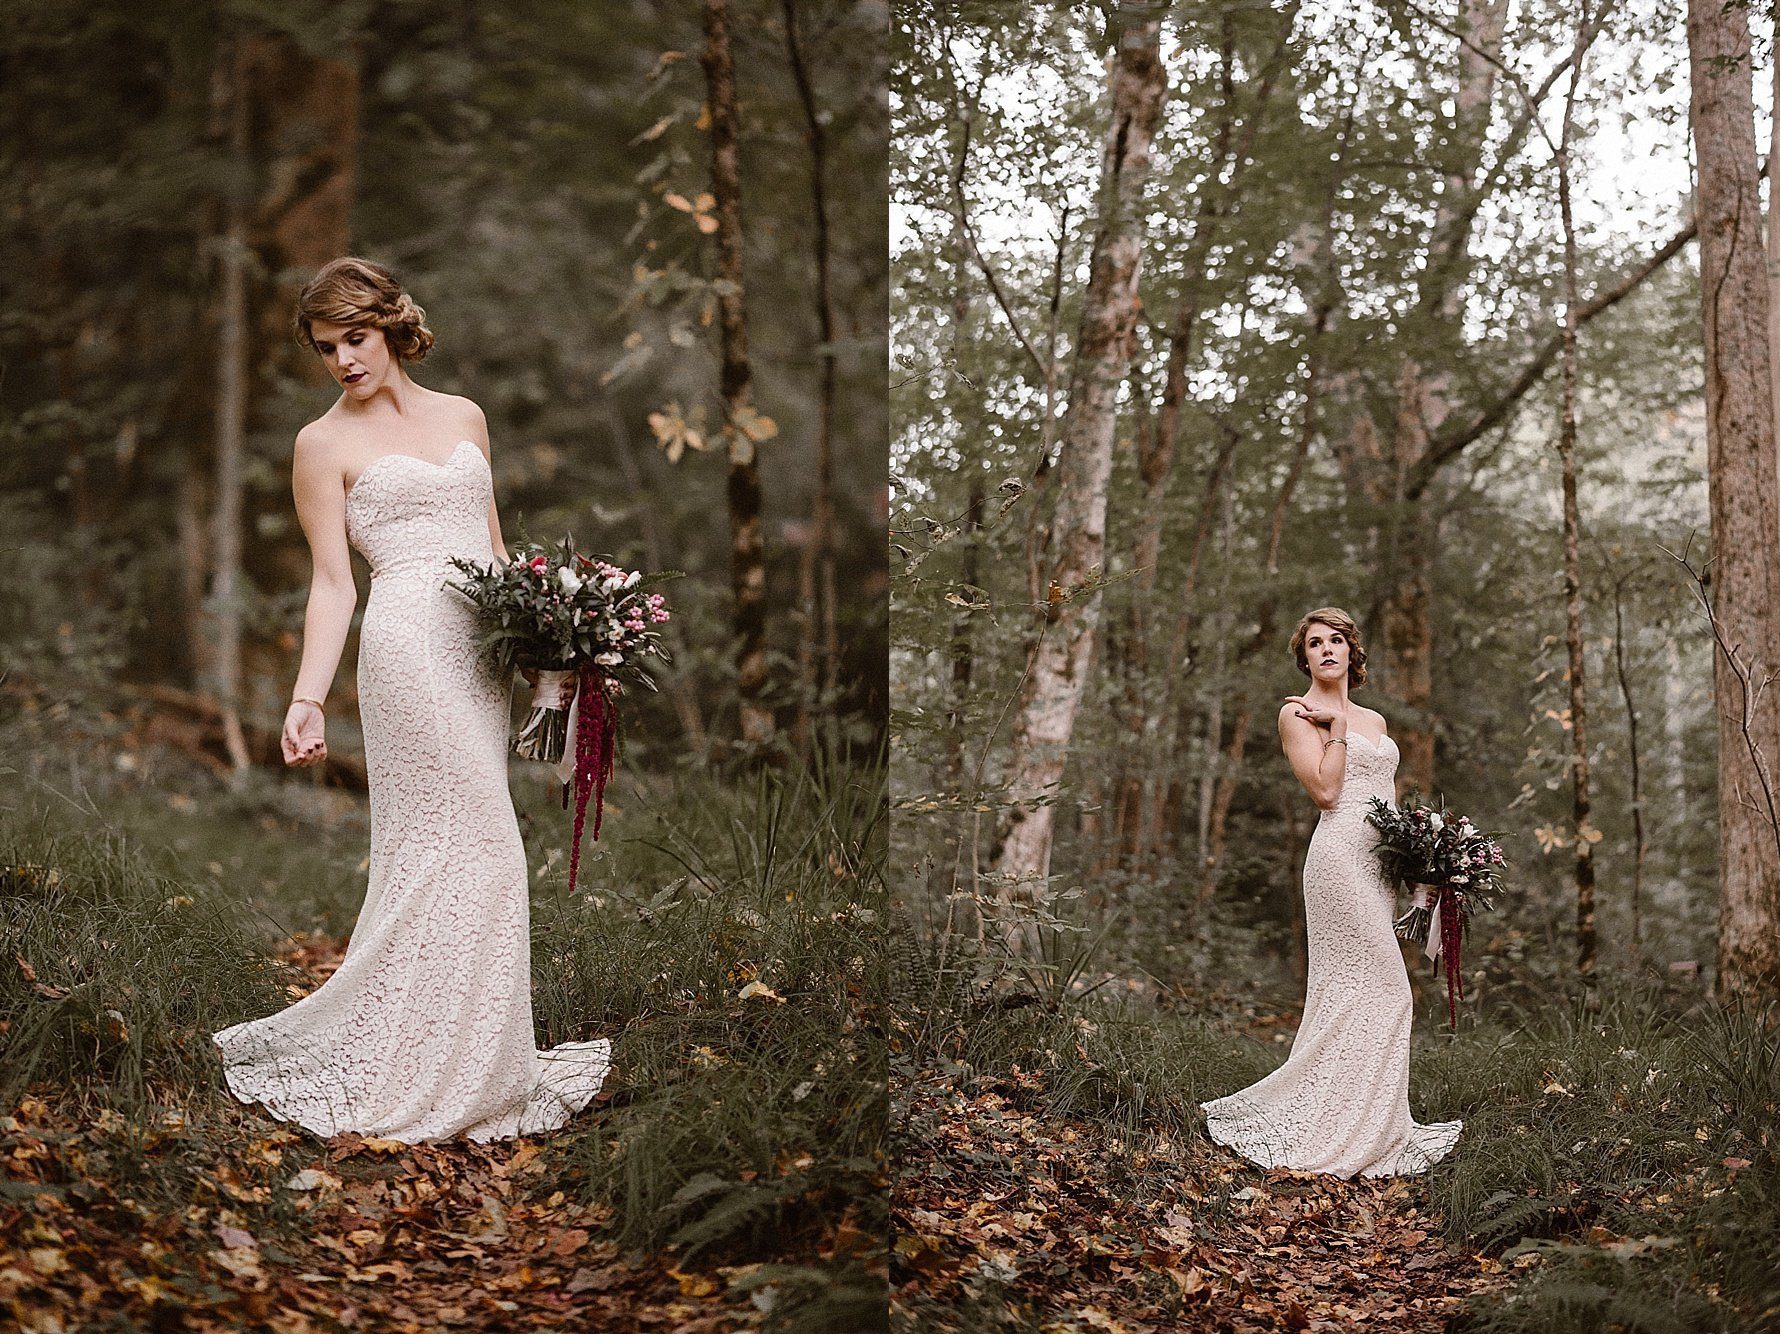 Bridal Photos in the Smokies | Erin Morrison Photography www.erinmorrisonphotography.com